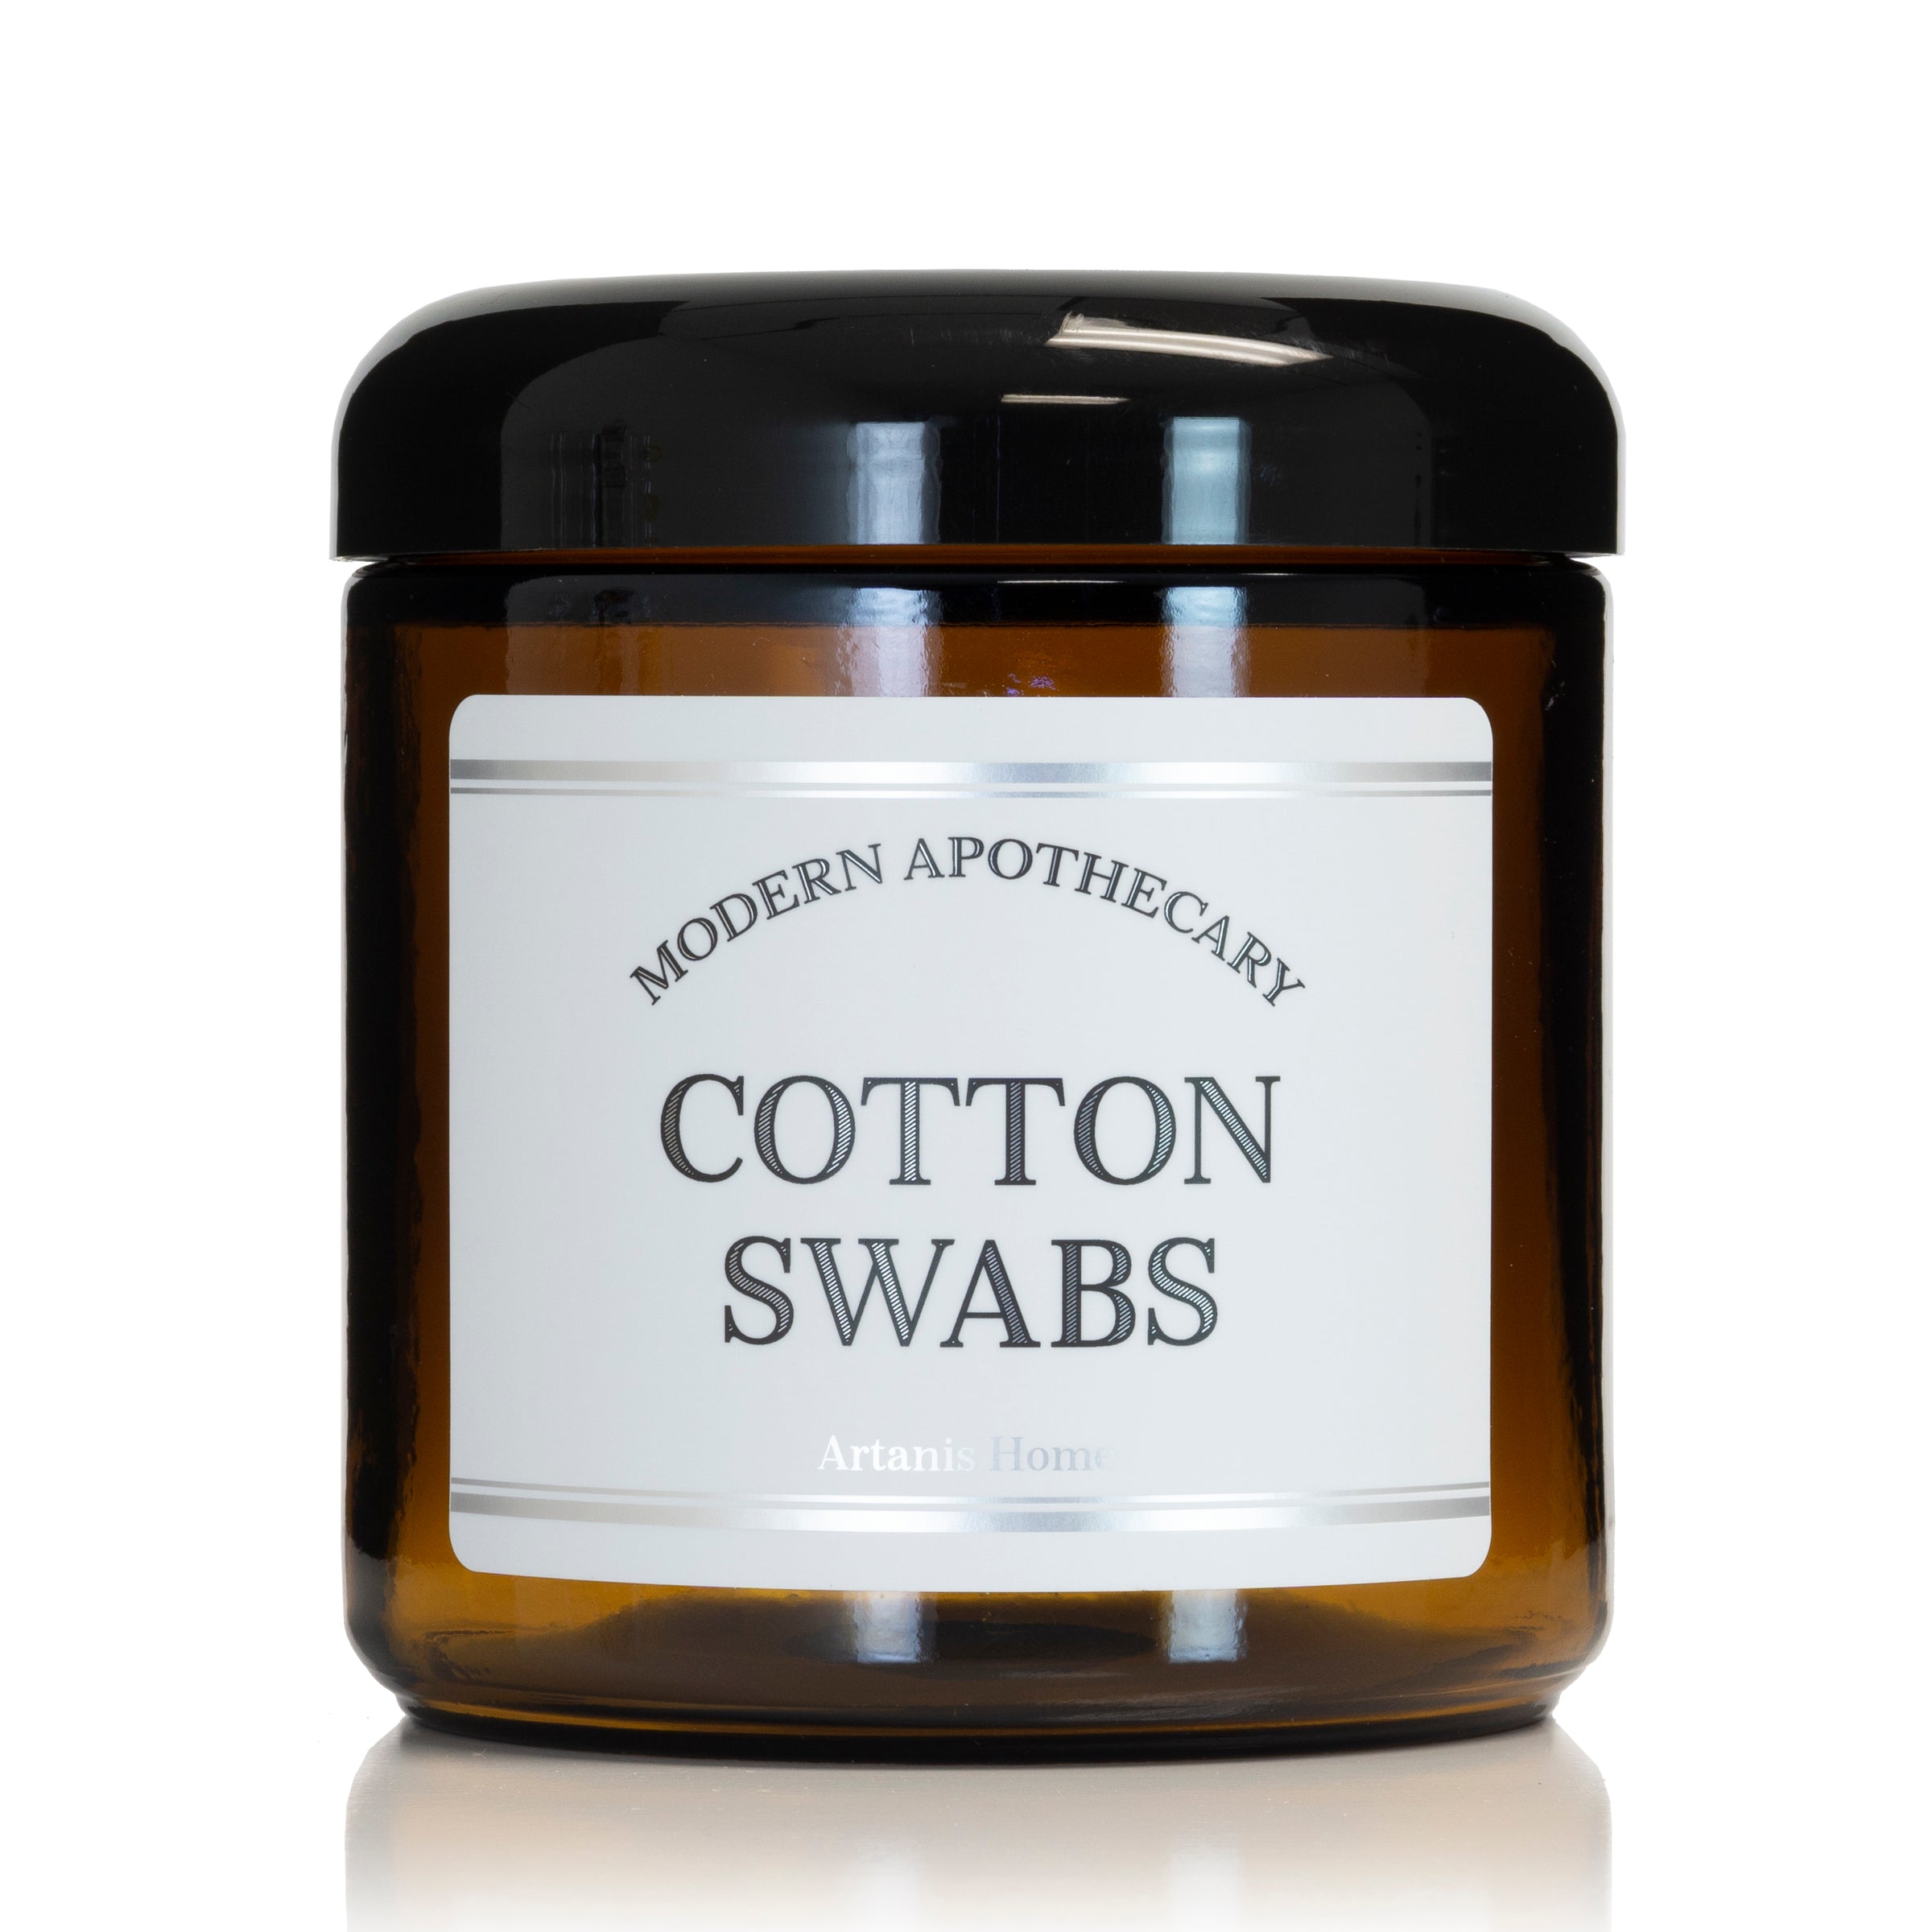 16 oz amber glass jar with Modern Apothecary Label and black dome lid, for cotton swabs.